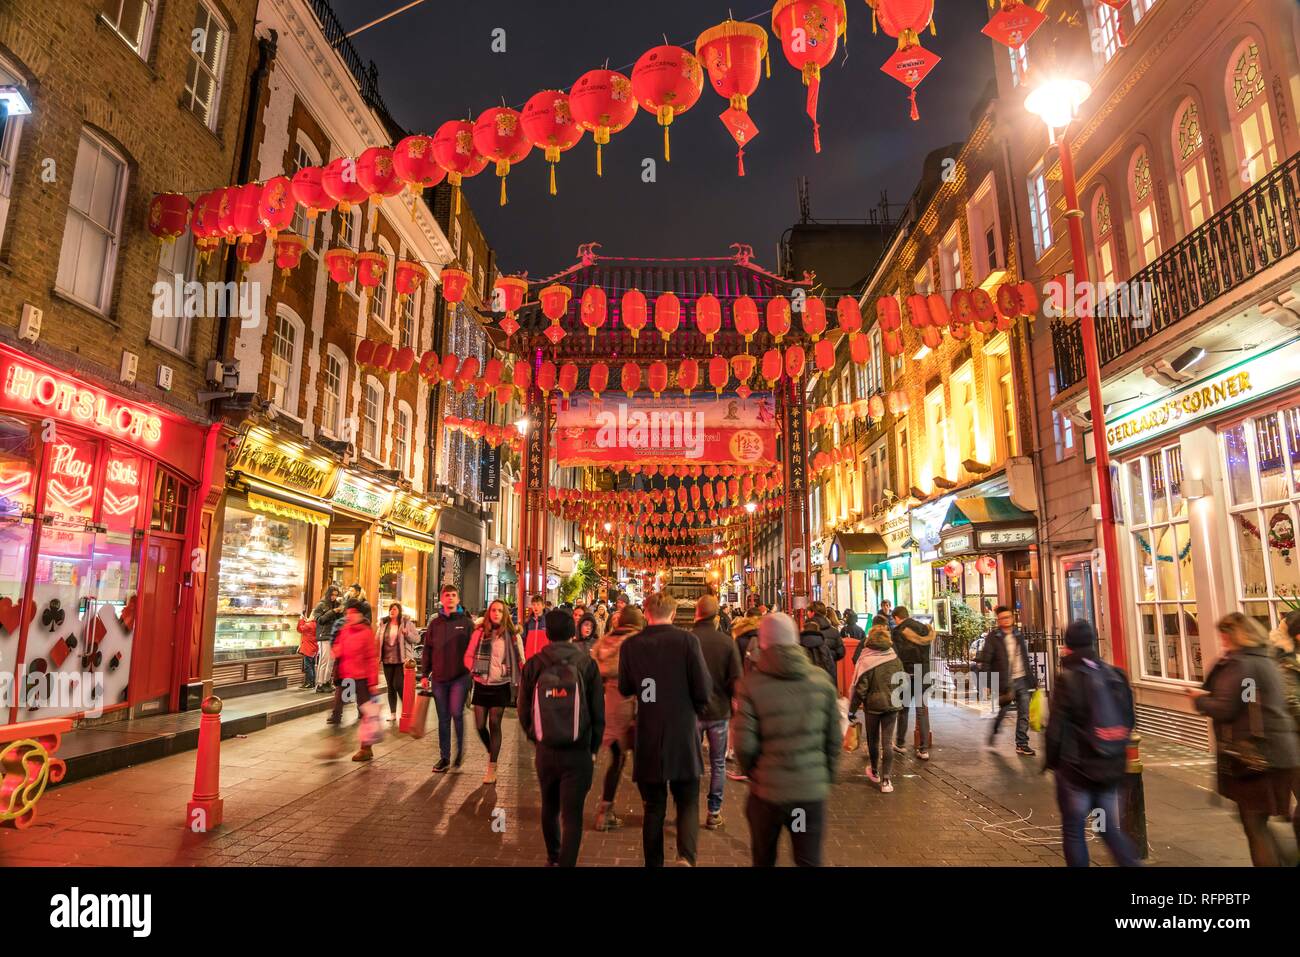 Pedestrian zone with red lanterns at night, Chinatown, London, Great Britain Stock Photo